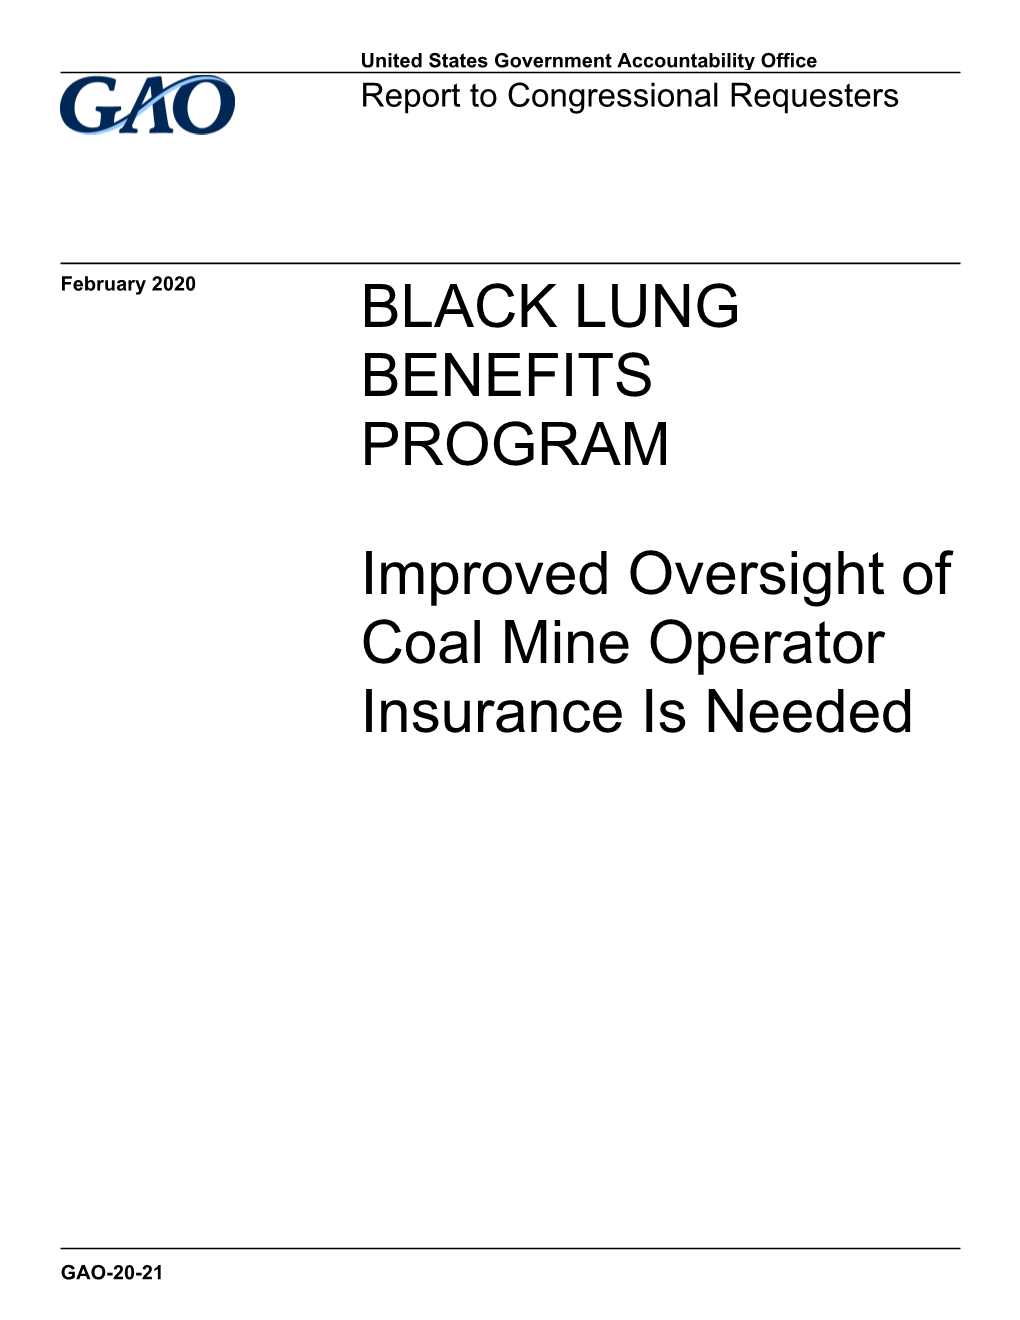 GAO-20-21, Black Lung Benefits Program: Improved Oversight of Coal Mine Operator Insurance Is Needed